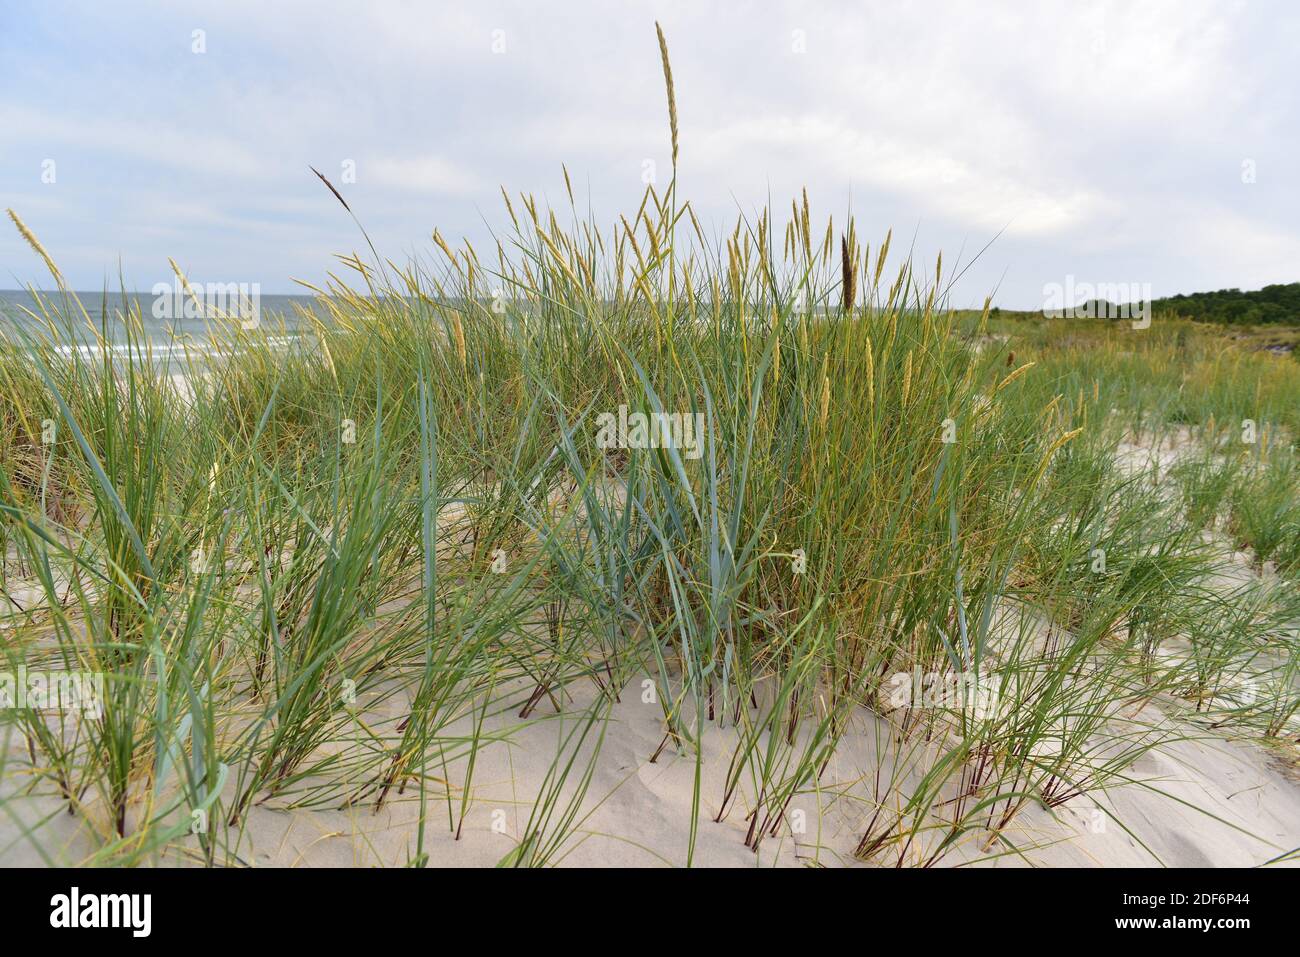 Blue lyme grass or sea lyme grass (Leymus arenarius or Elymus arenarius) is a perennial herb native to west north Europe. This photo was taken in Stock Photo